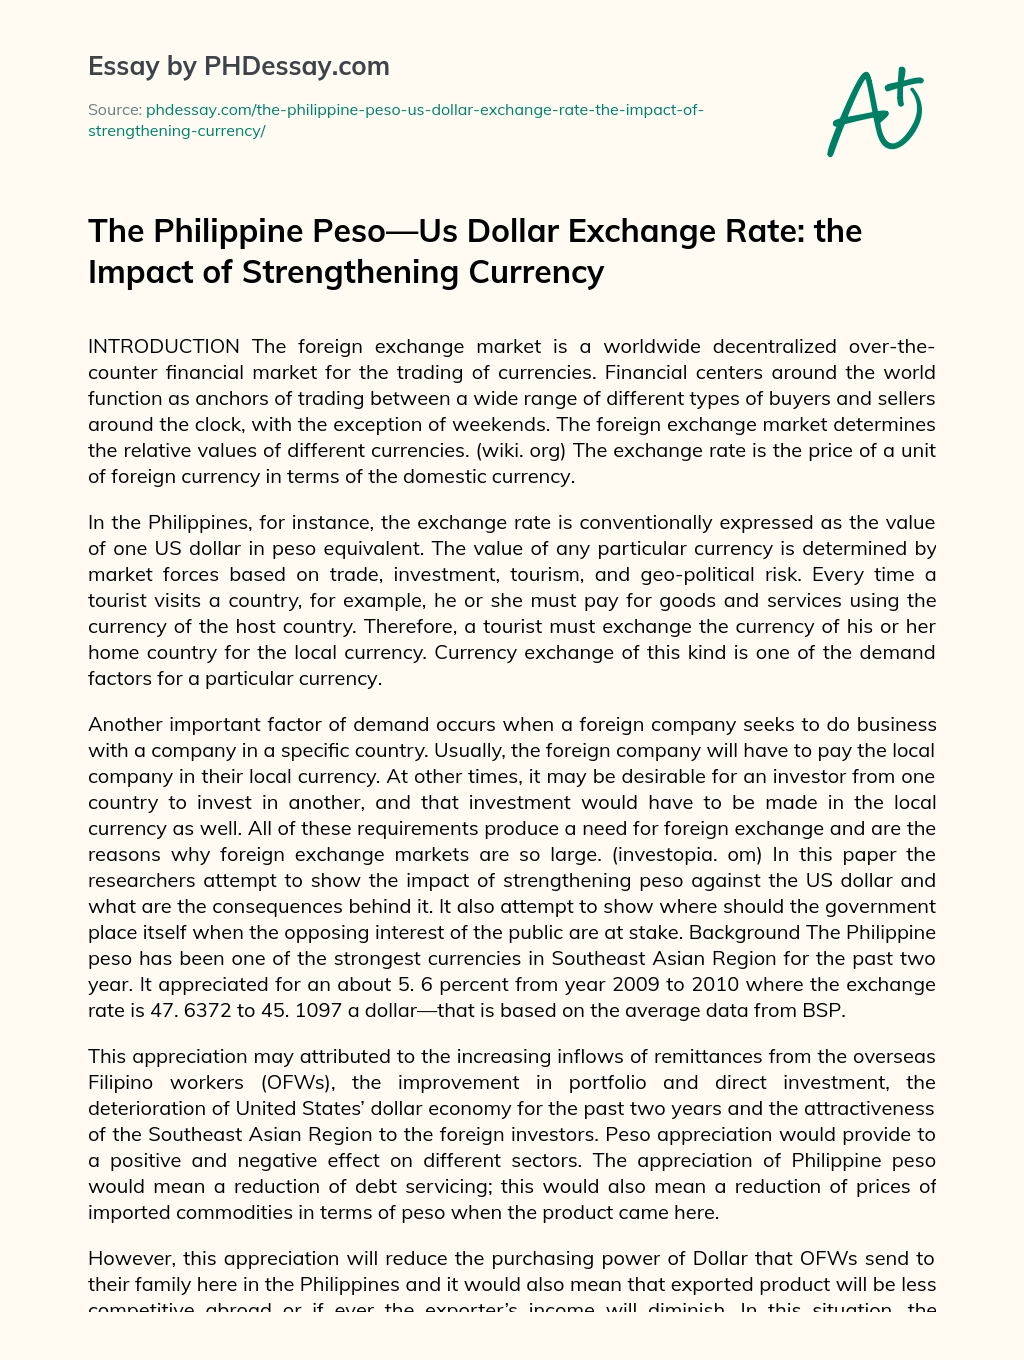 The Philippine Peso—Us Dollar Exchange Rate: the Impact of Strengthening Currency essay